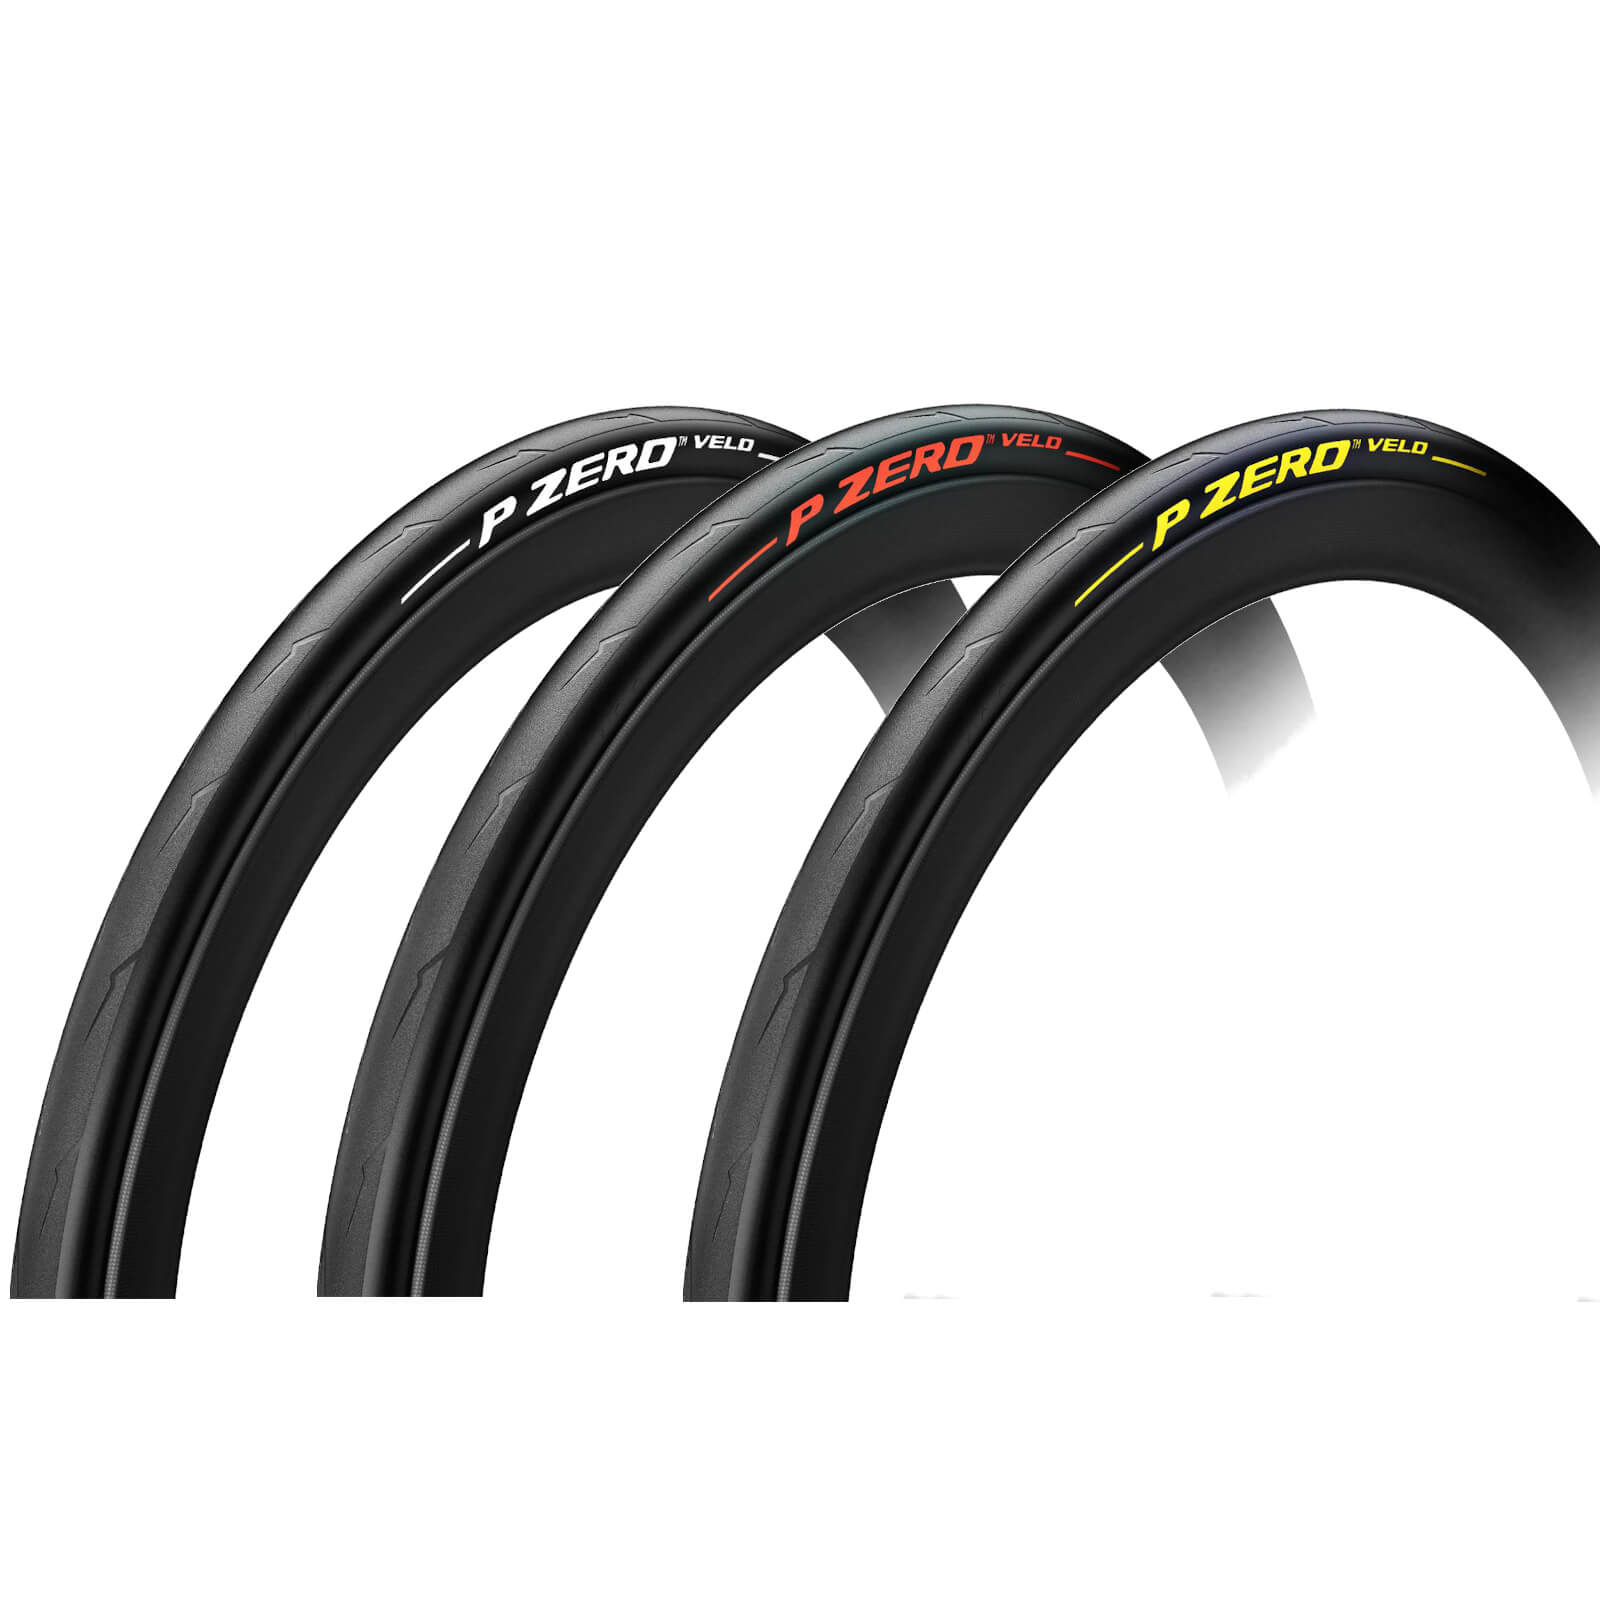 Pirelli P ZERO™ Race Colour Edition Tubeless Road Tyre Twin Pack - 26mm - Yellow Label